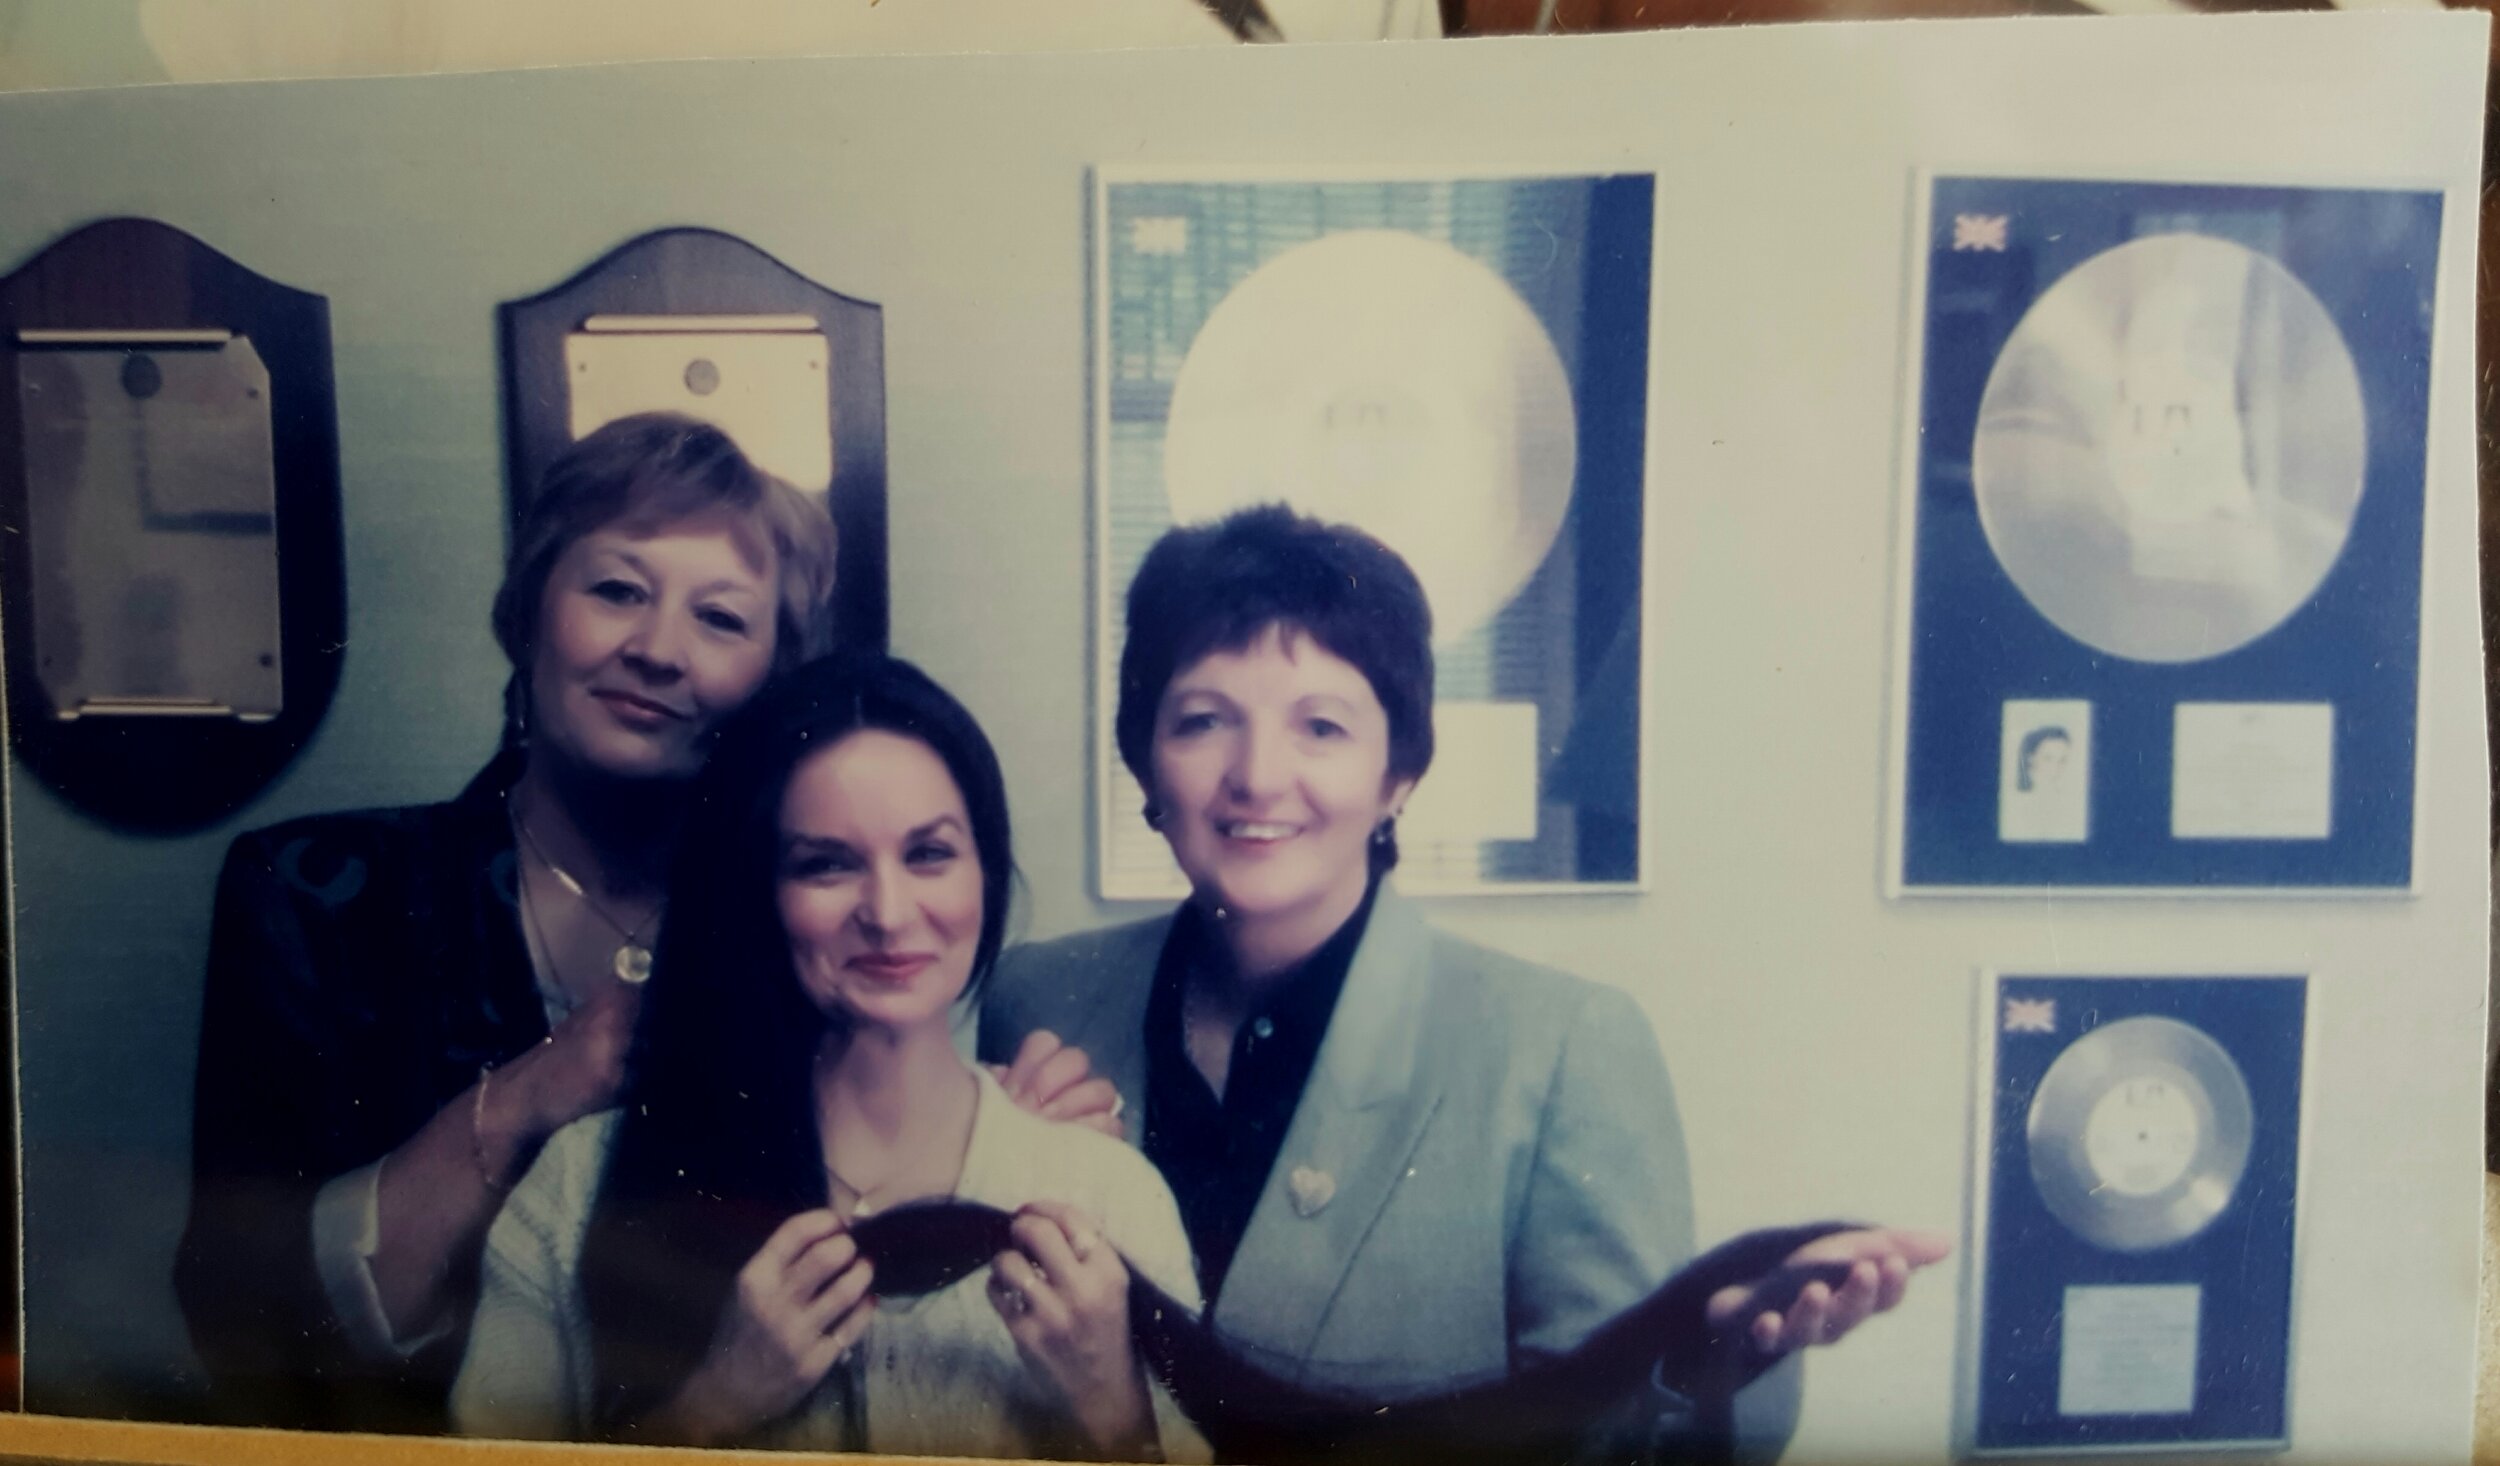  Meeting Crystal Gayle in her office, Nashville with Shirley Jones 